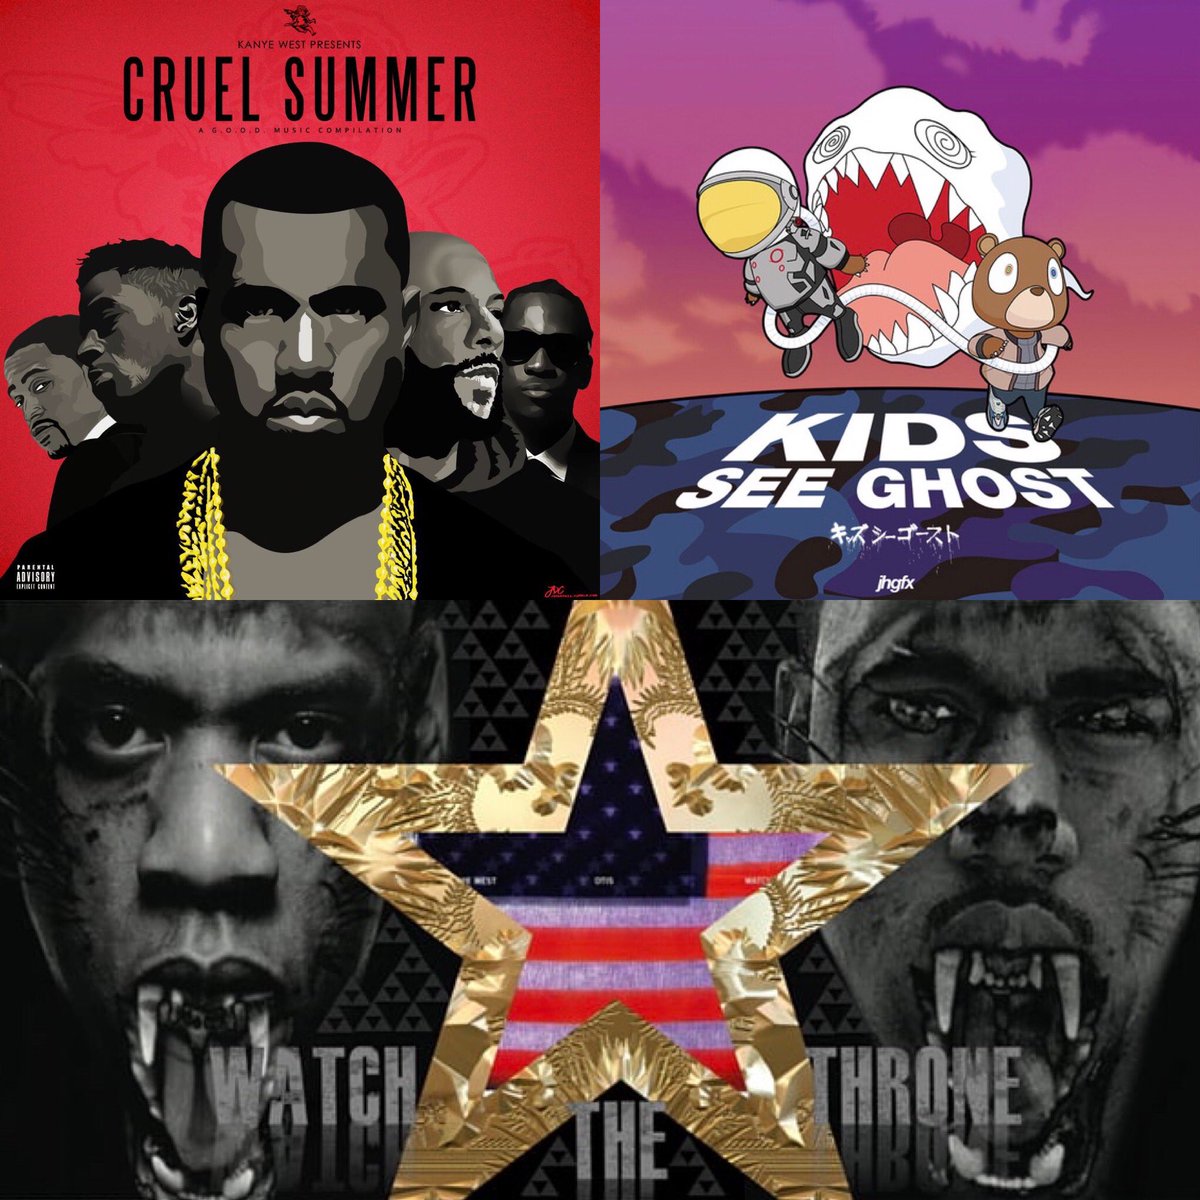 Aside from Kanye West’s solo discography, his collaborative efforts have also featured very impressive production.Watch The Throne - Kanye & Jay ZCruel Summer - GOOD MusicKid See Ghosts - Kanye & Kid Cudi